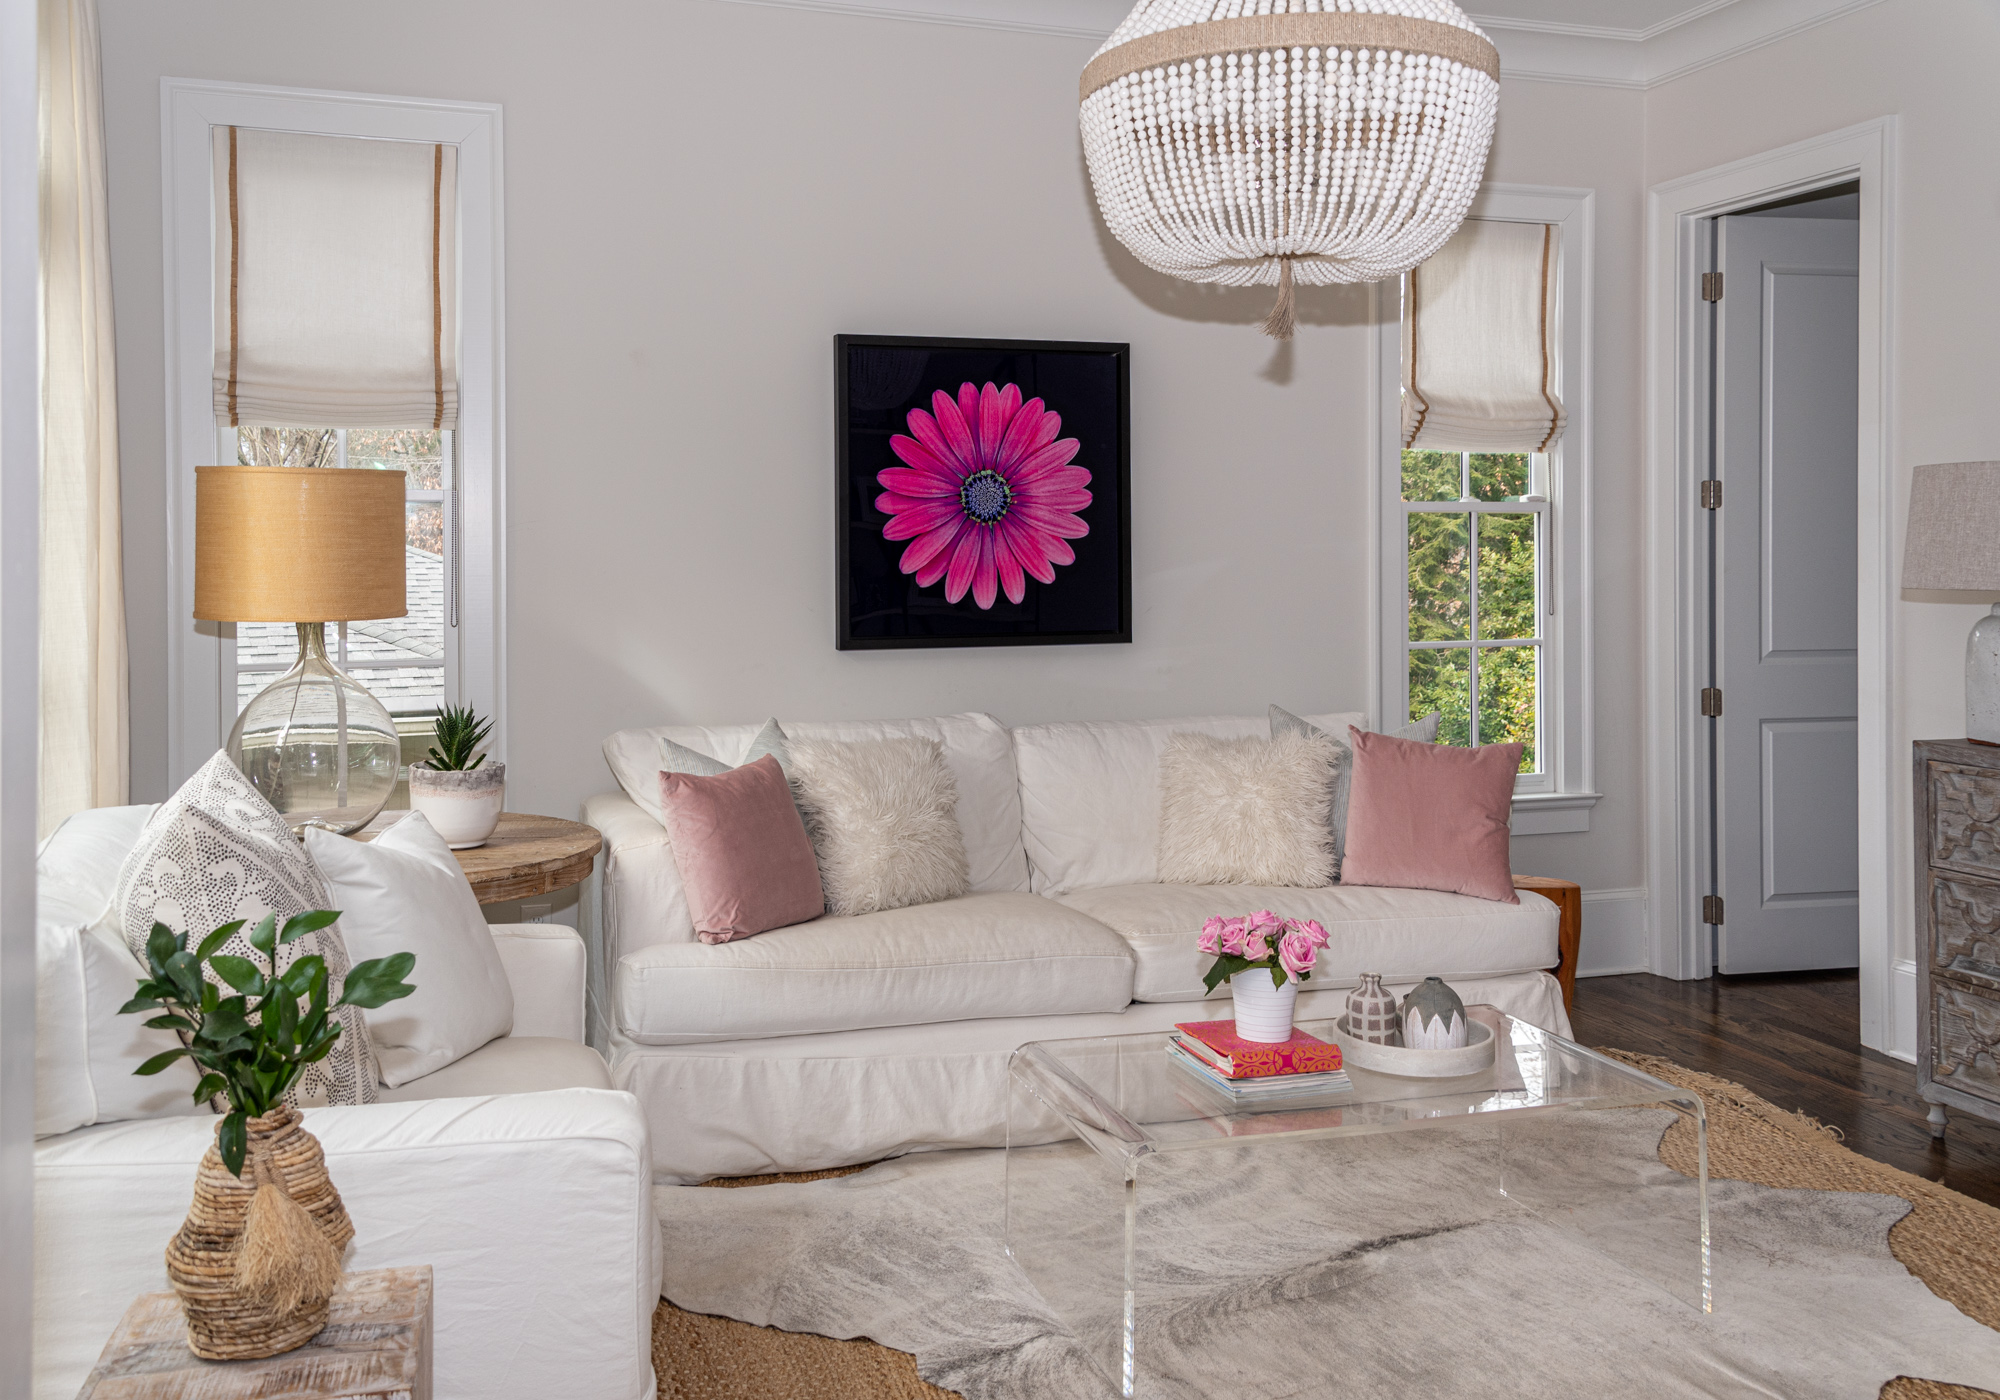 The Pastner daughters enjoy playtime in the parlor. Jody Goldstein’s flower photo adds whimsy to the space.